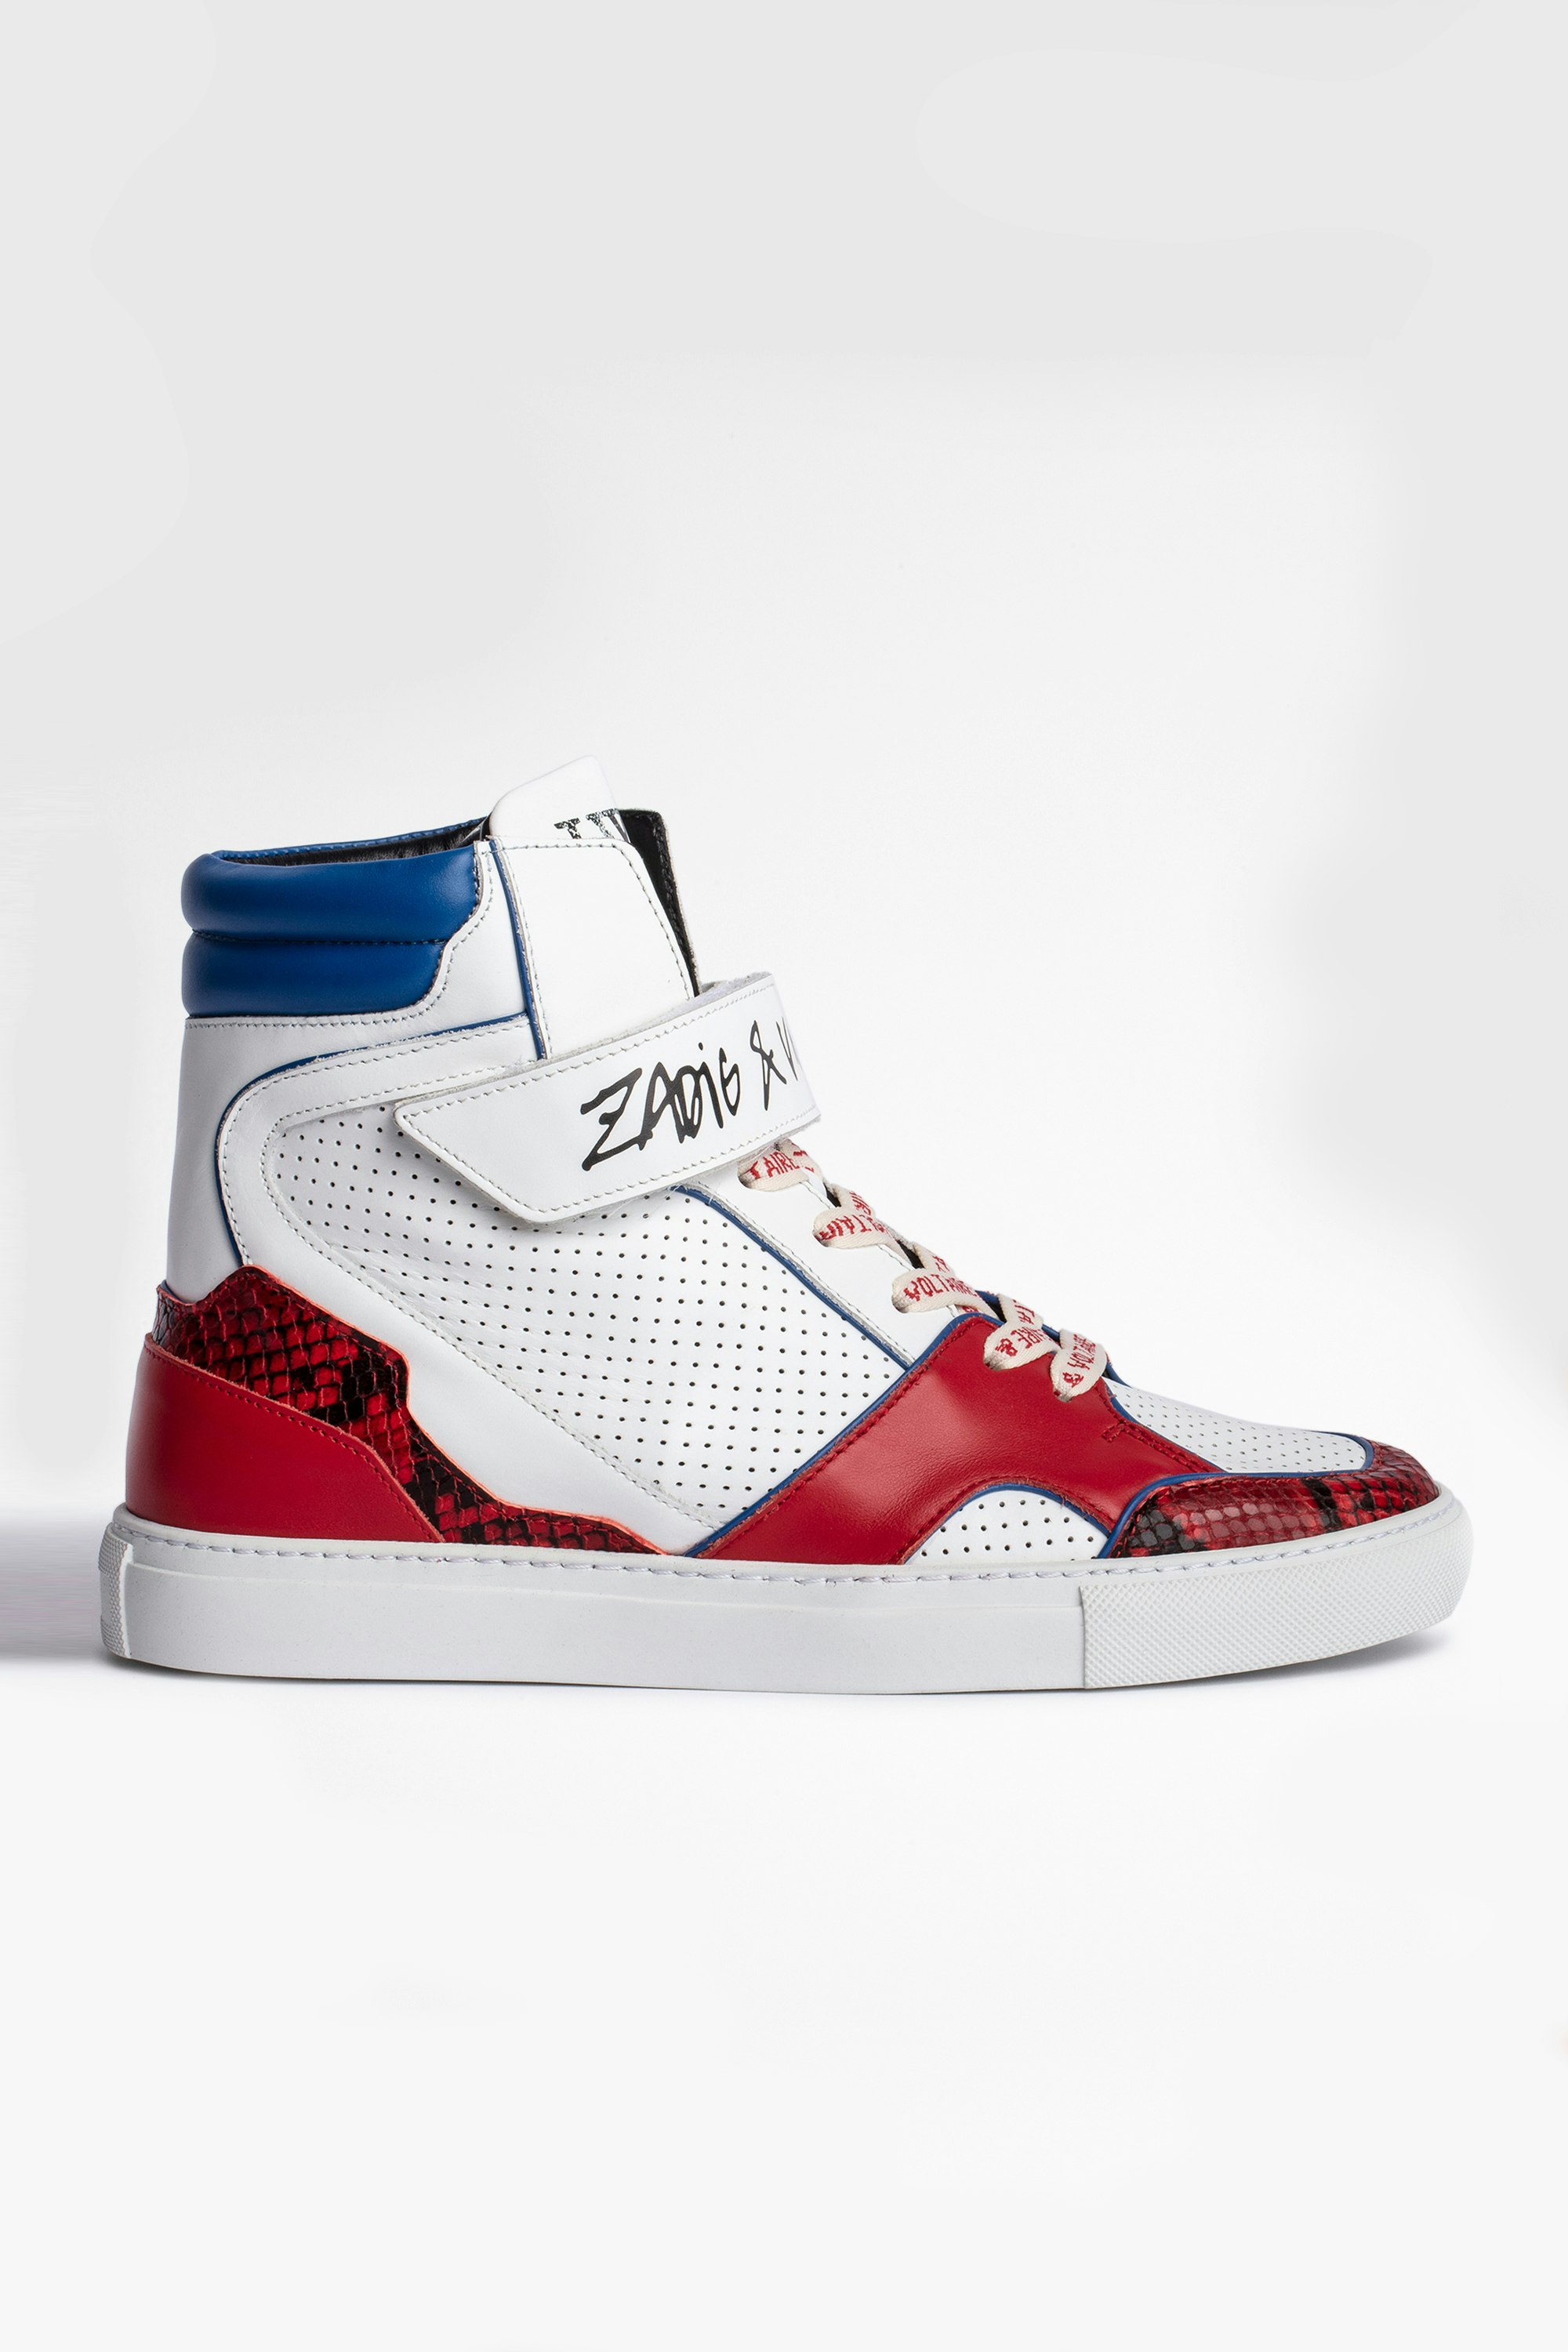 ZV1747 High Flash Sneakers Women's high-top trainers in tricolored leather. Buying this product, you support a responsible leather production through Leather Working Group.